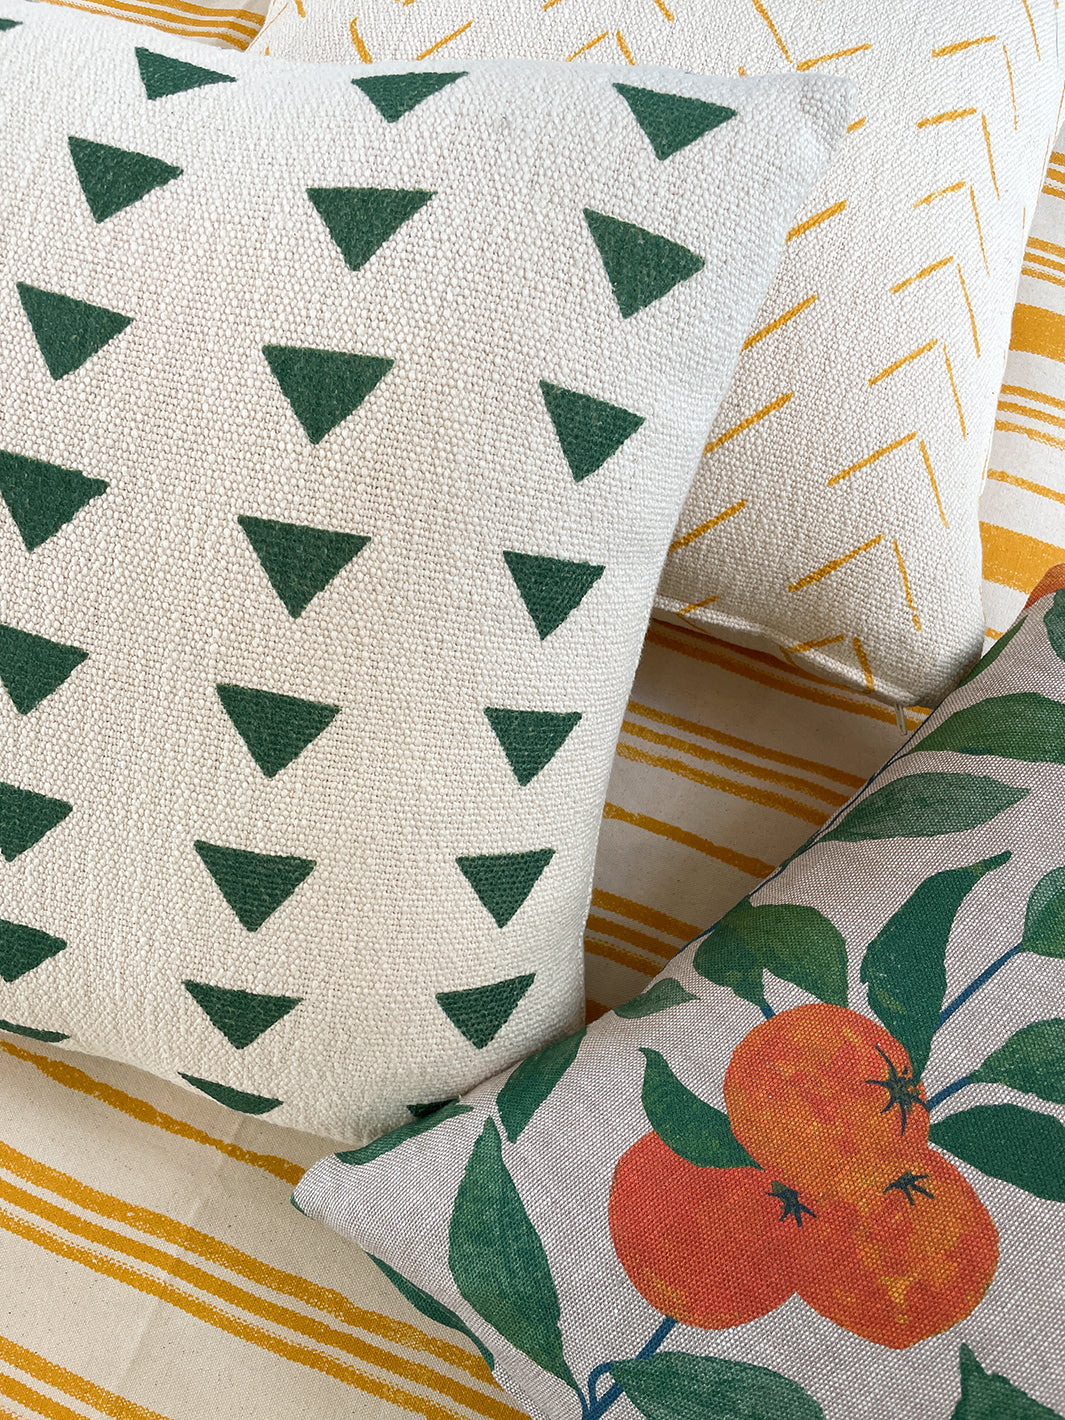 'Fabric by the Yard - Triangles - Green on California Cotton